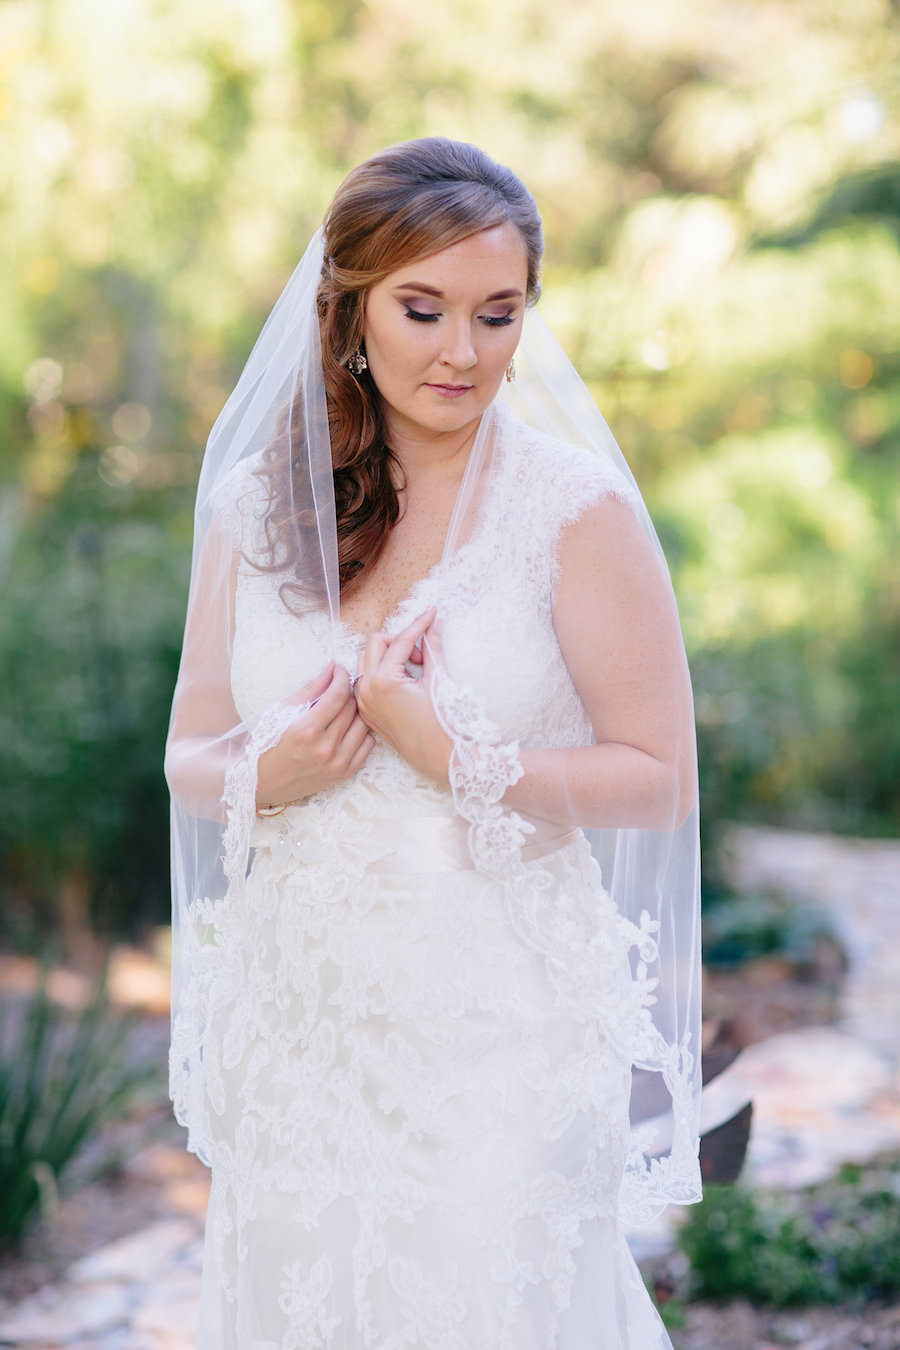 Outdoor, Dover Bridal Wedding Portrait in Lace, Ivory Maggie Sottero Wedding Dress and Lace Veil